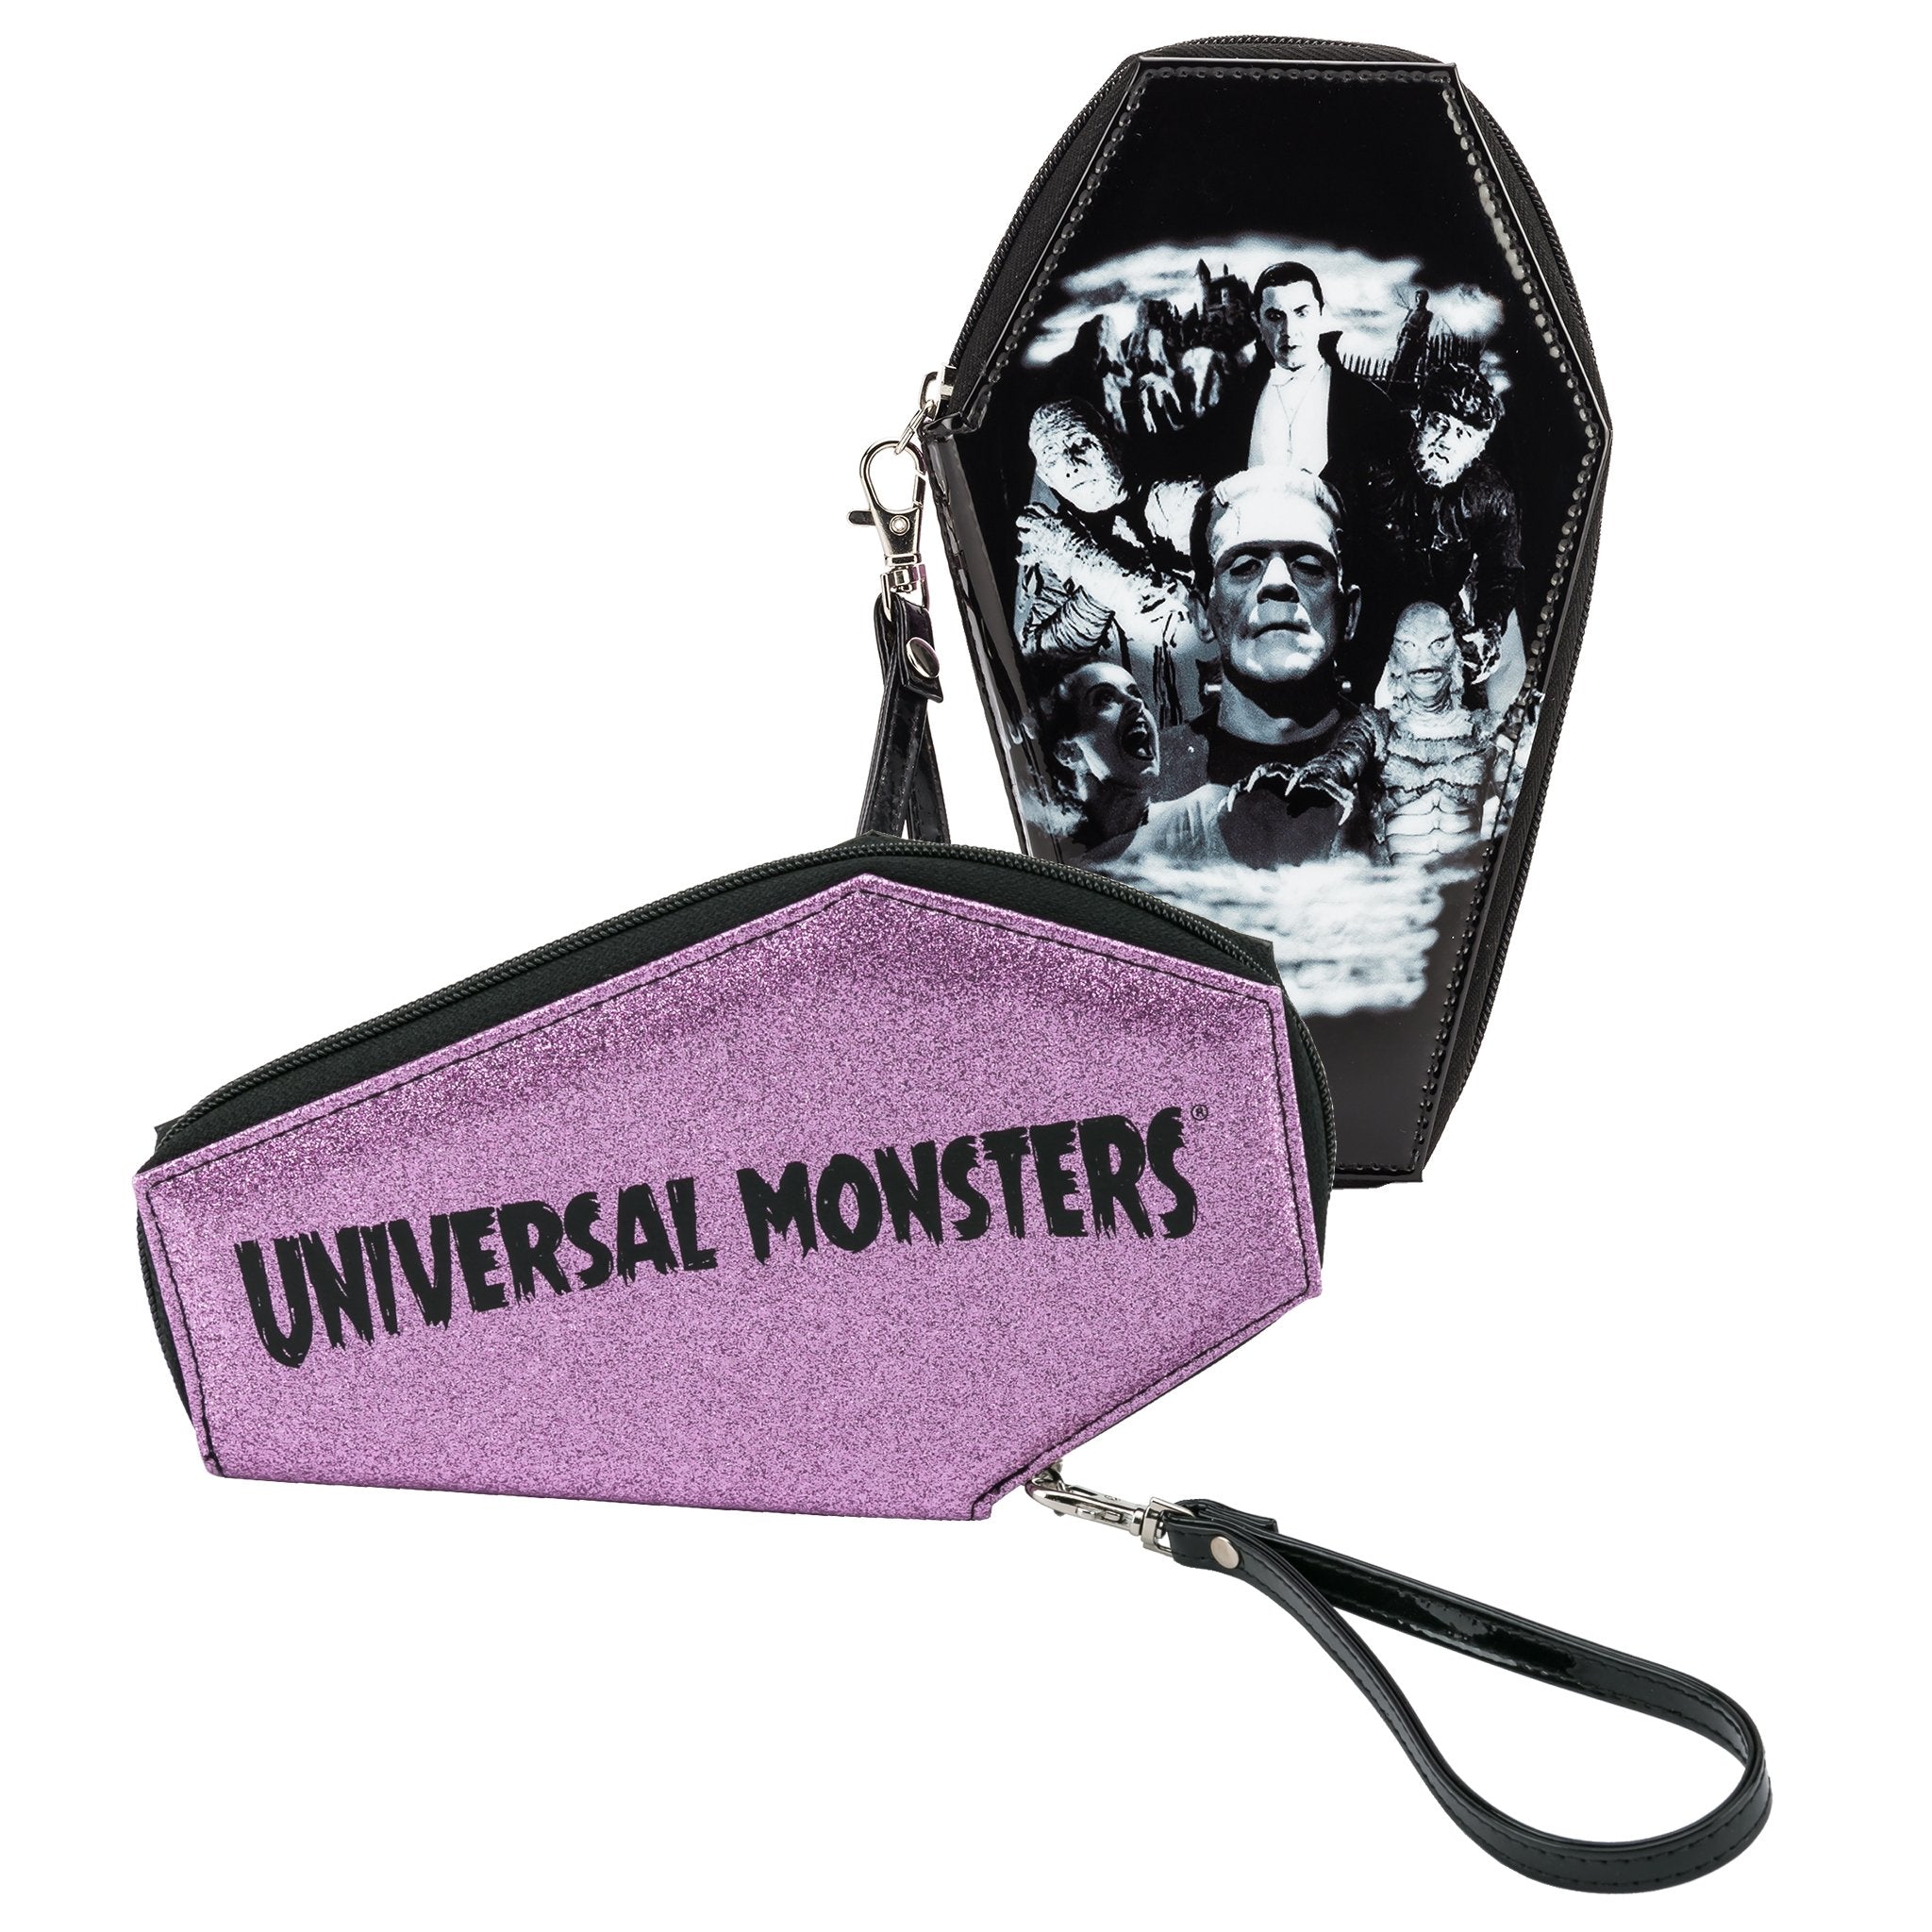 This is a Universal Monsters glitter coffin wallet that is black and pink and has Frankenstein, bride, Dracula, wolfman, mummy and creature from the black lagoon.